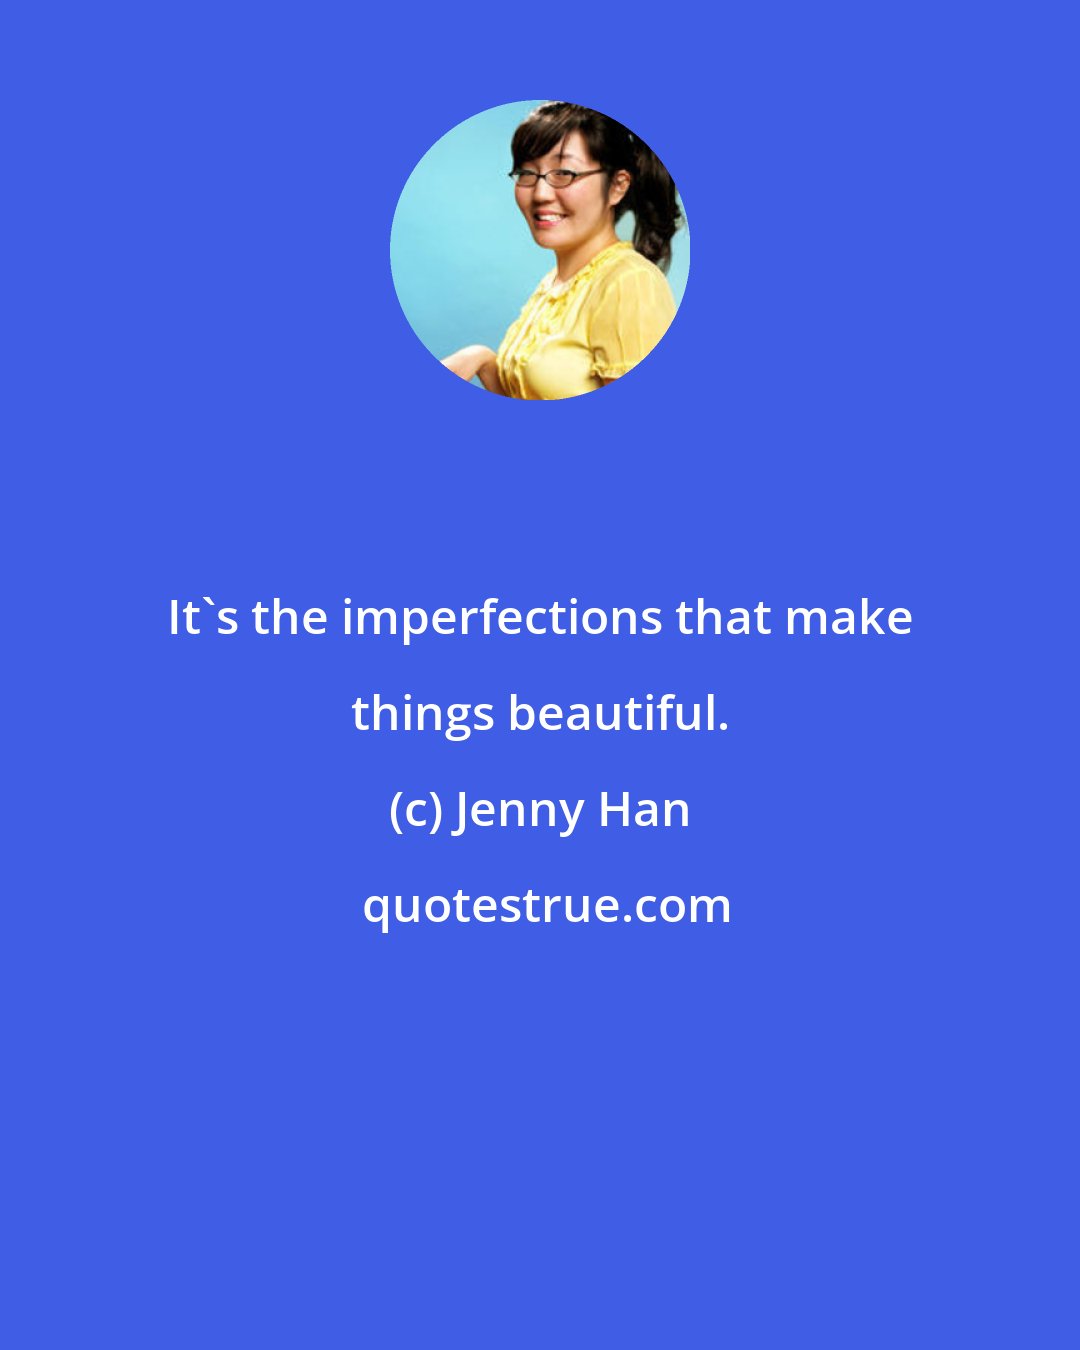 Jenny Han: It's the imperfections that make things beautiful.